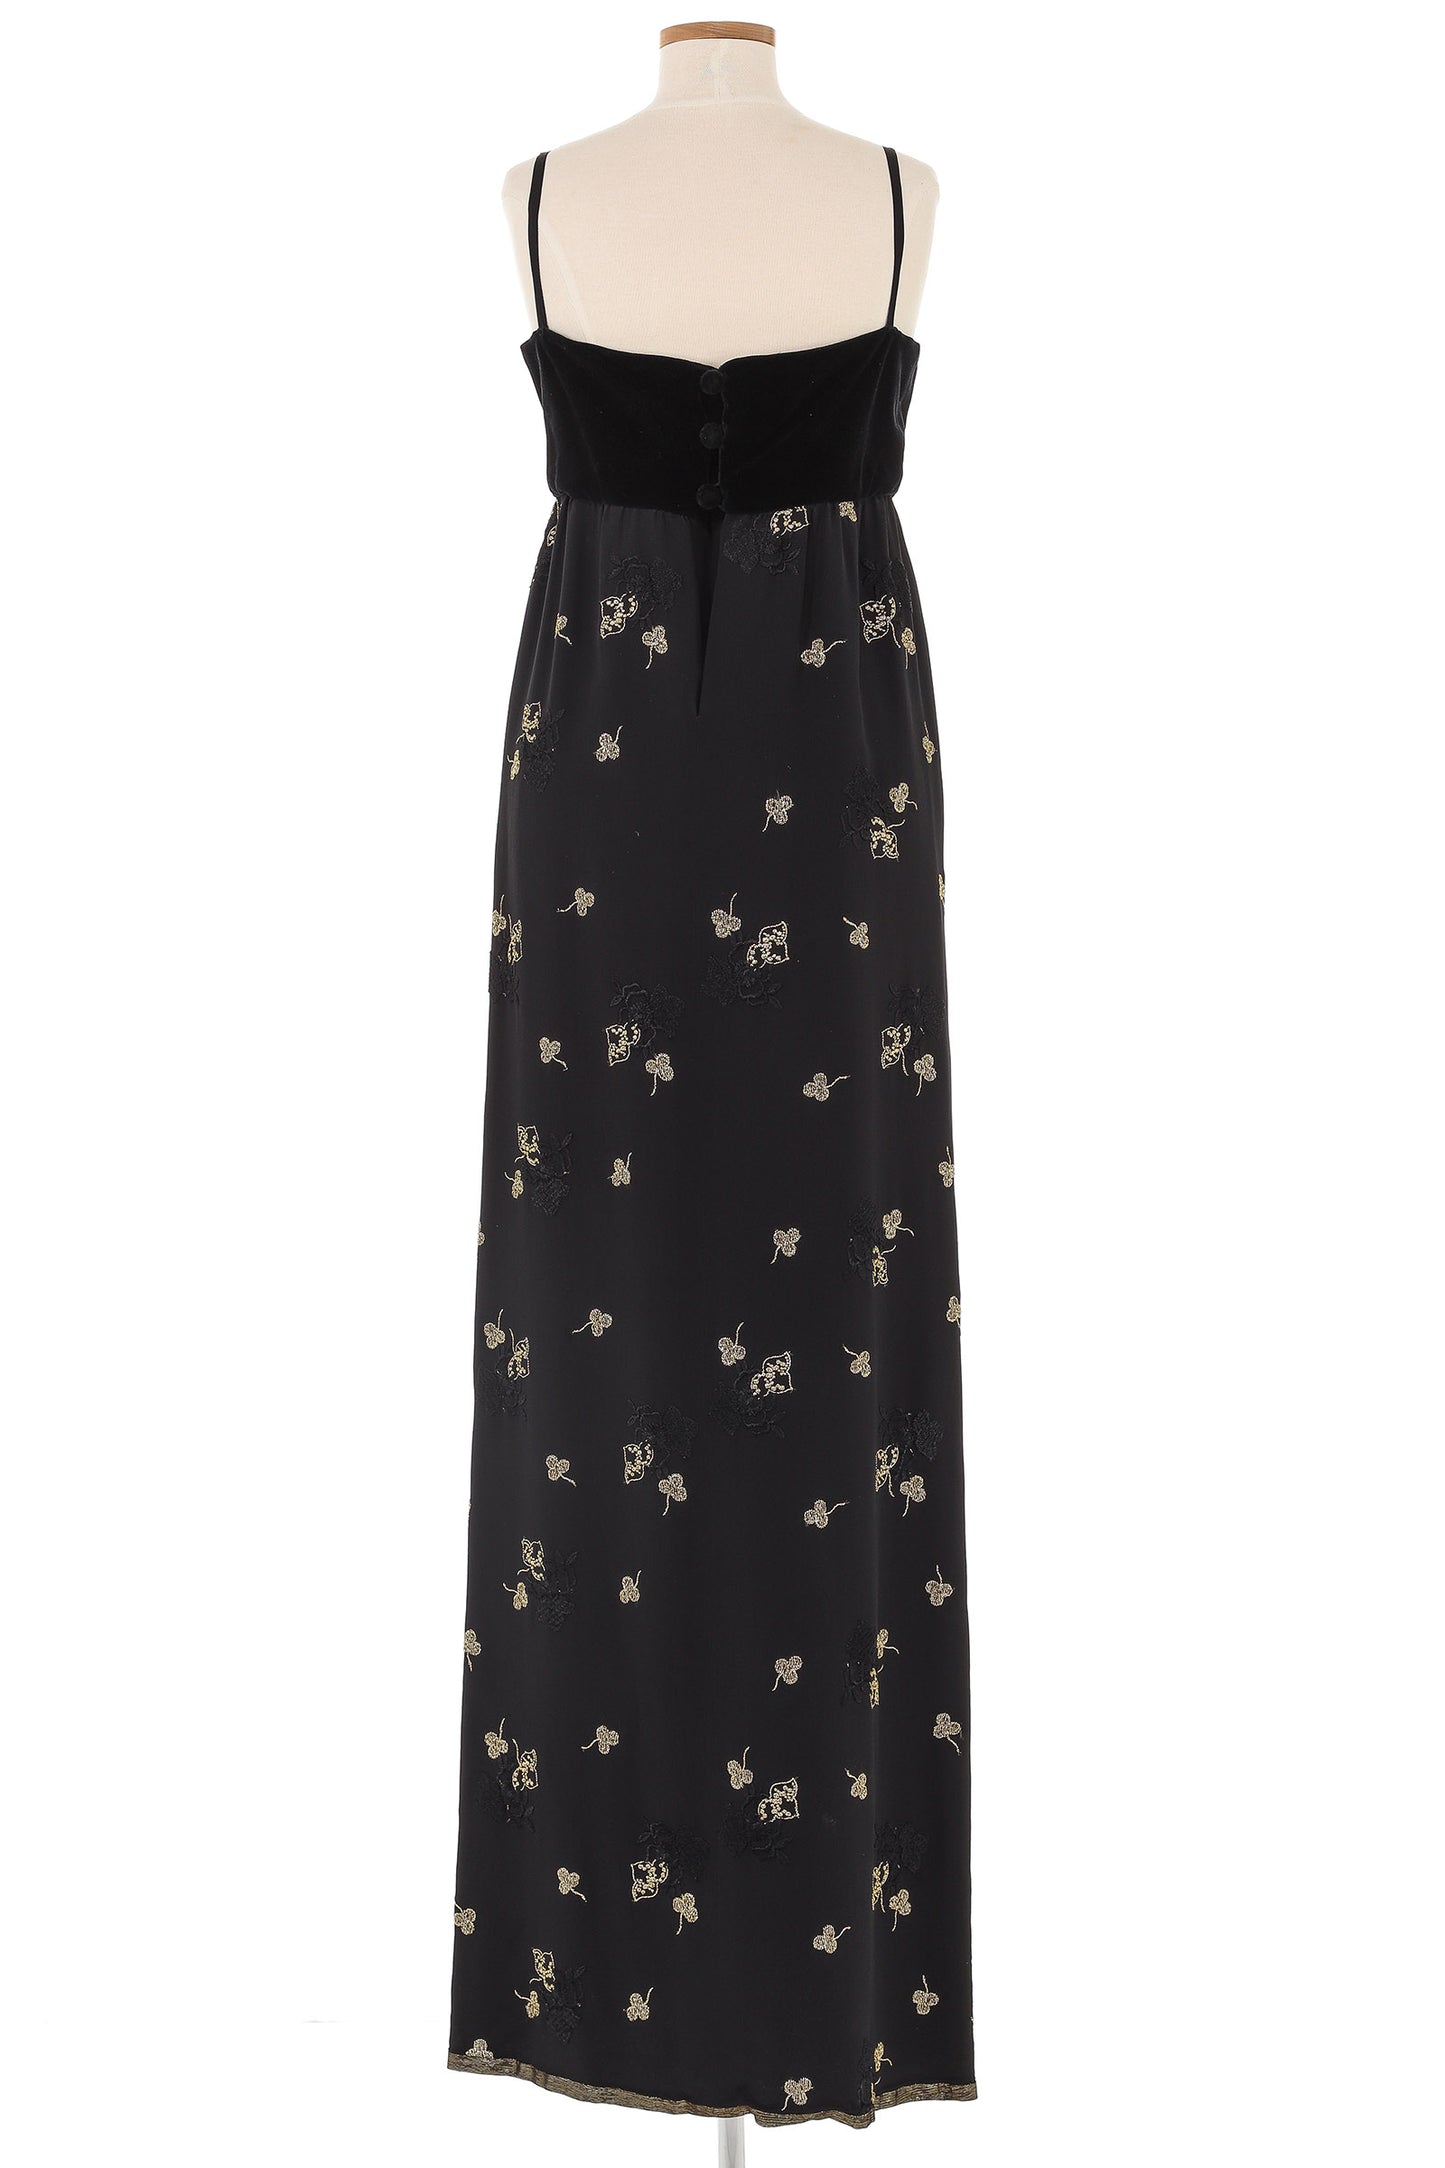 Chloé by Karl Lagerfeld Black Gown with Gold Flower Embroidery